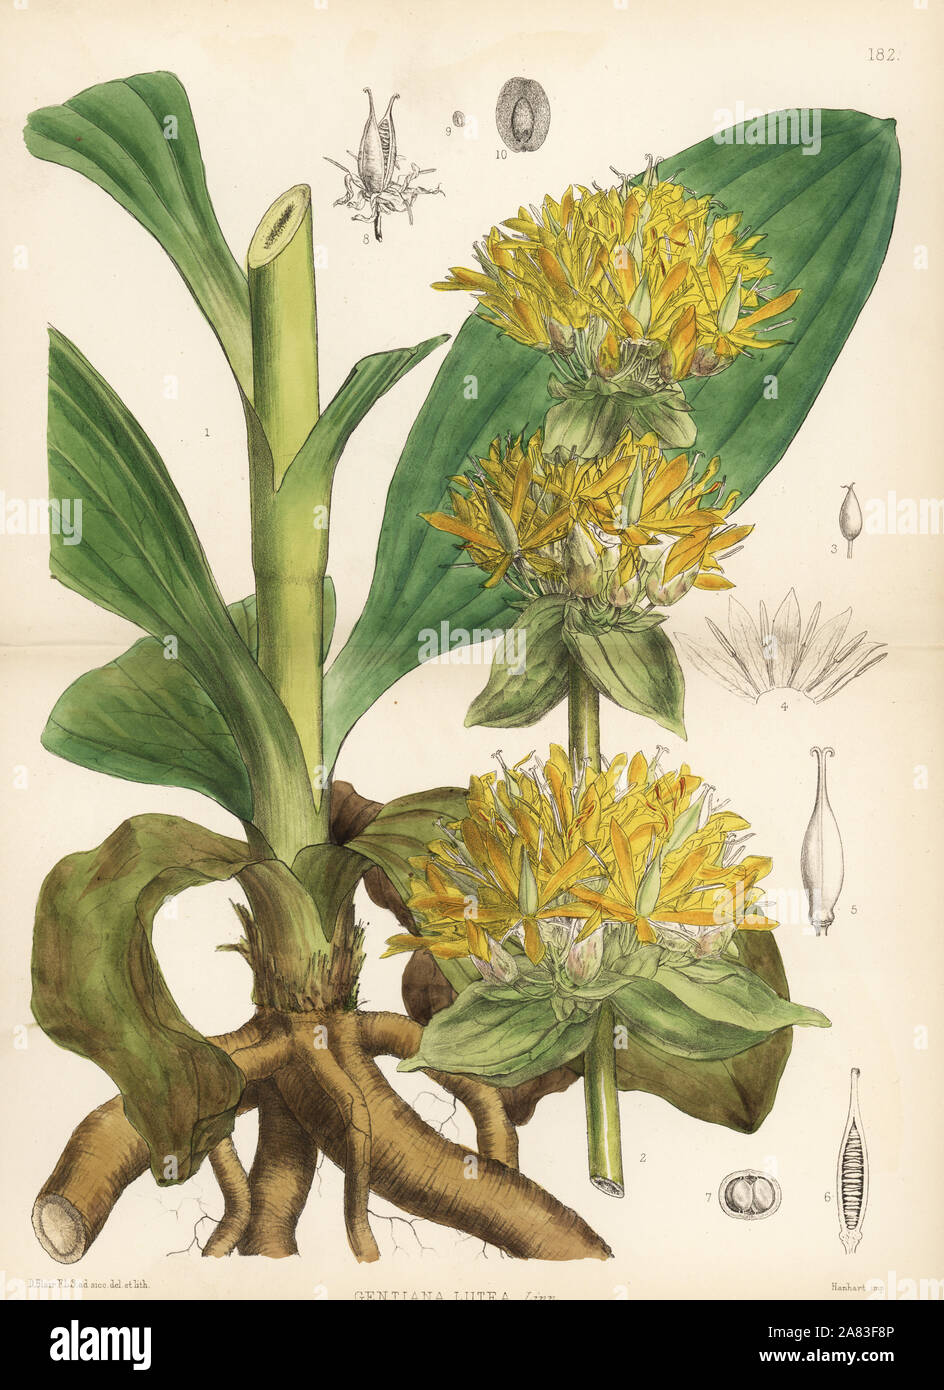 Yellow gentian, Gentiana lutea. Handcoloured lithograph by Hanhart after a botanical illustration by David Blair from Robert Bentley and Henry Trimen's Medicinal Plants, London, 1880. Stock Photo